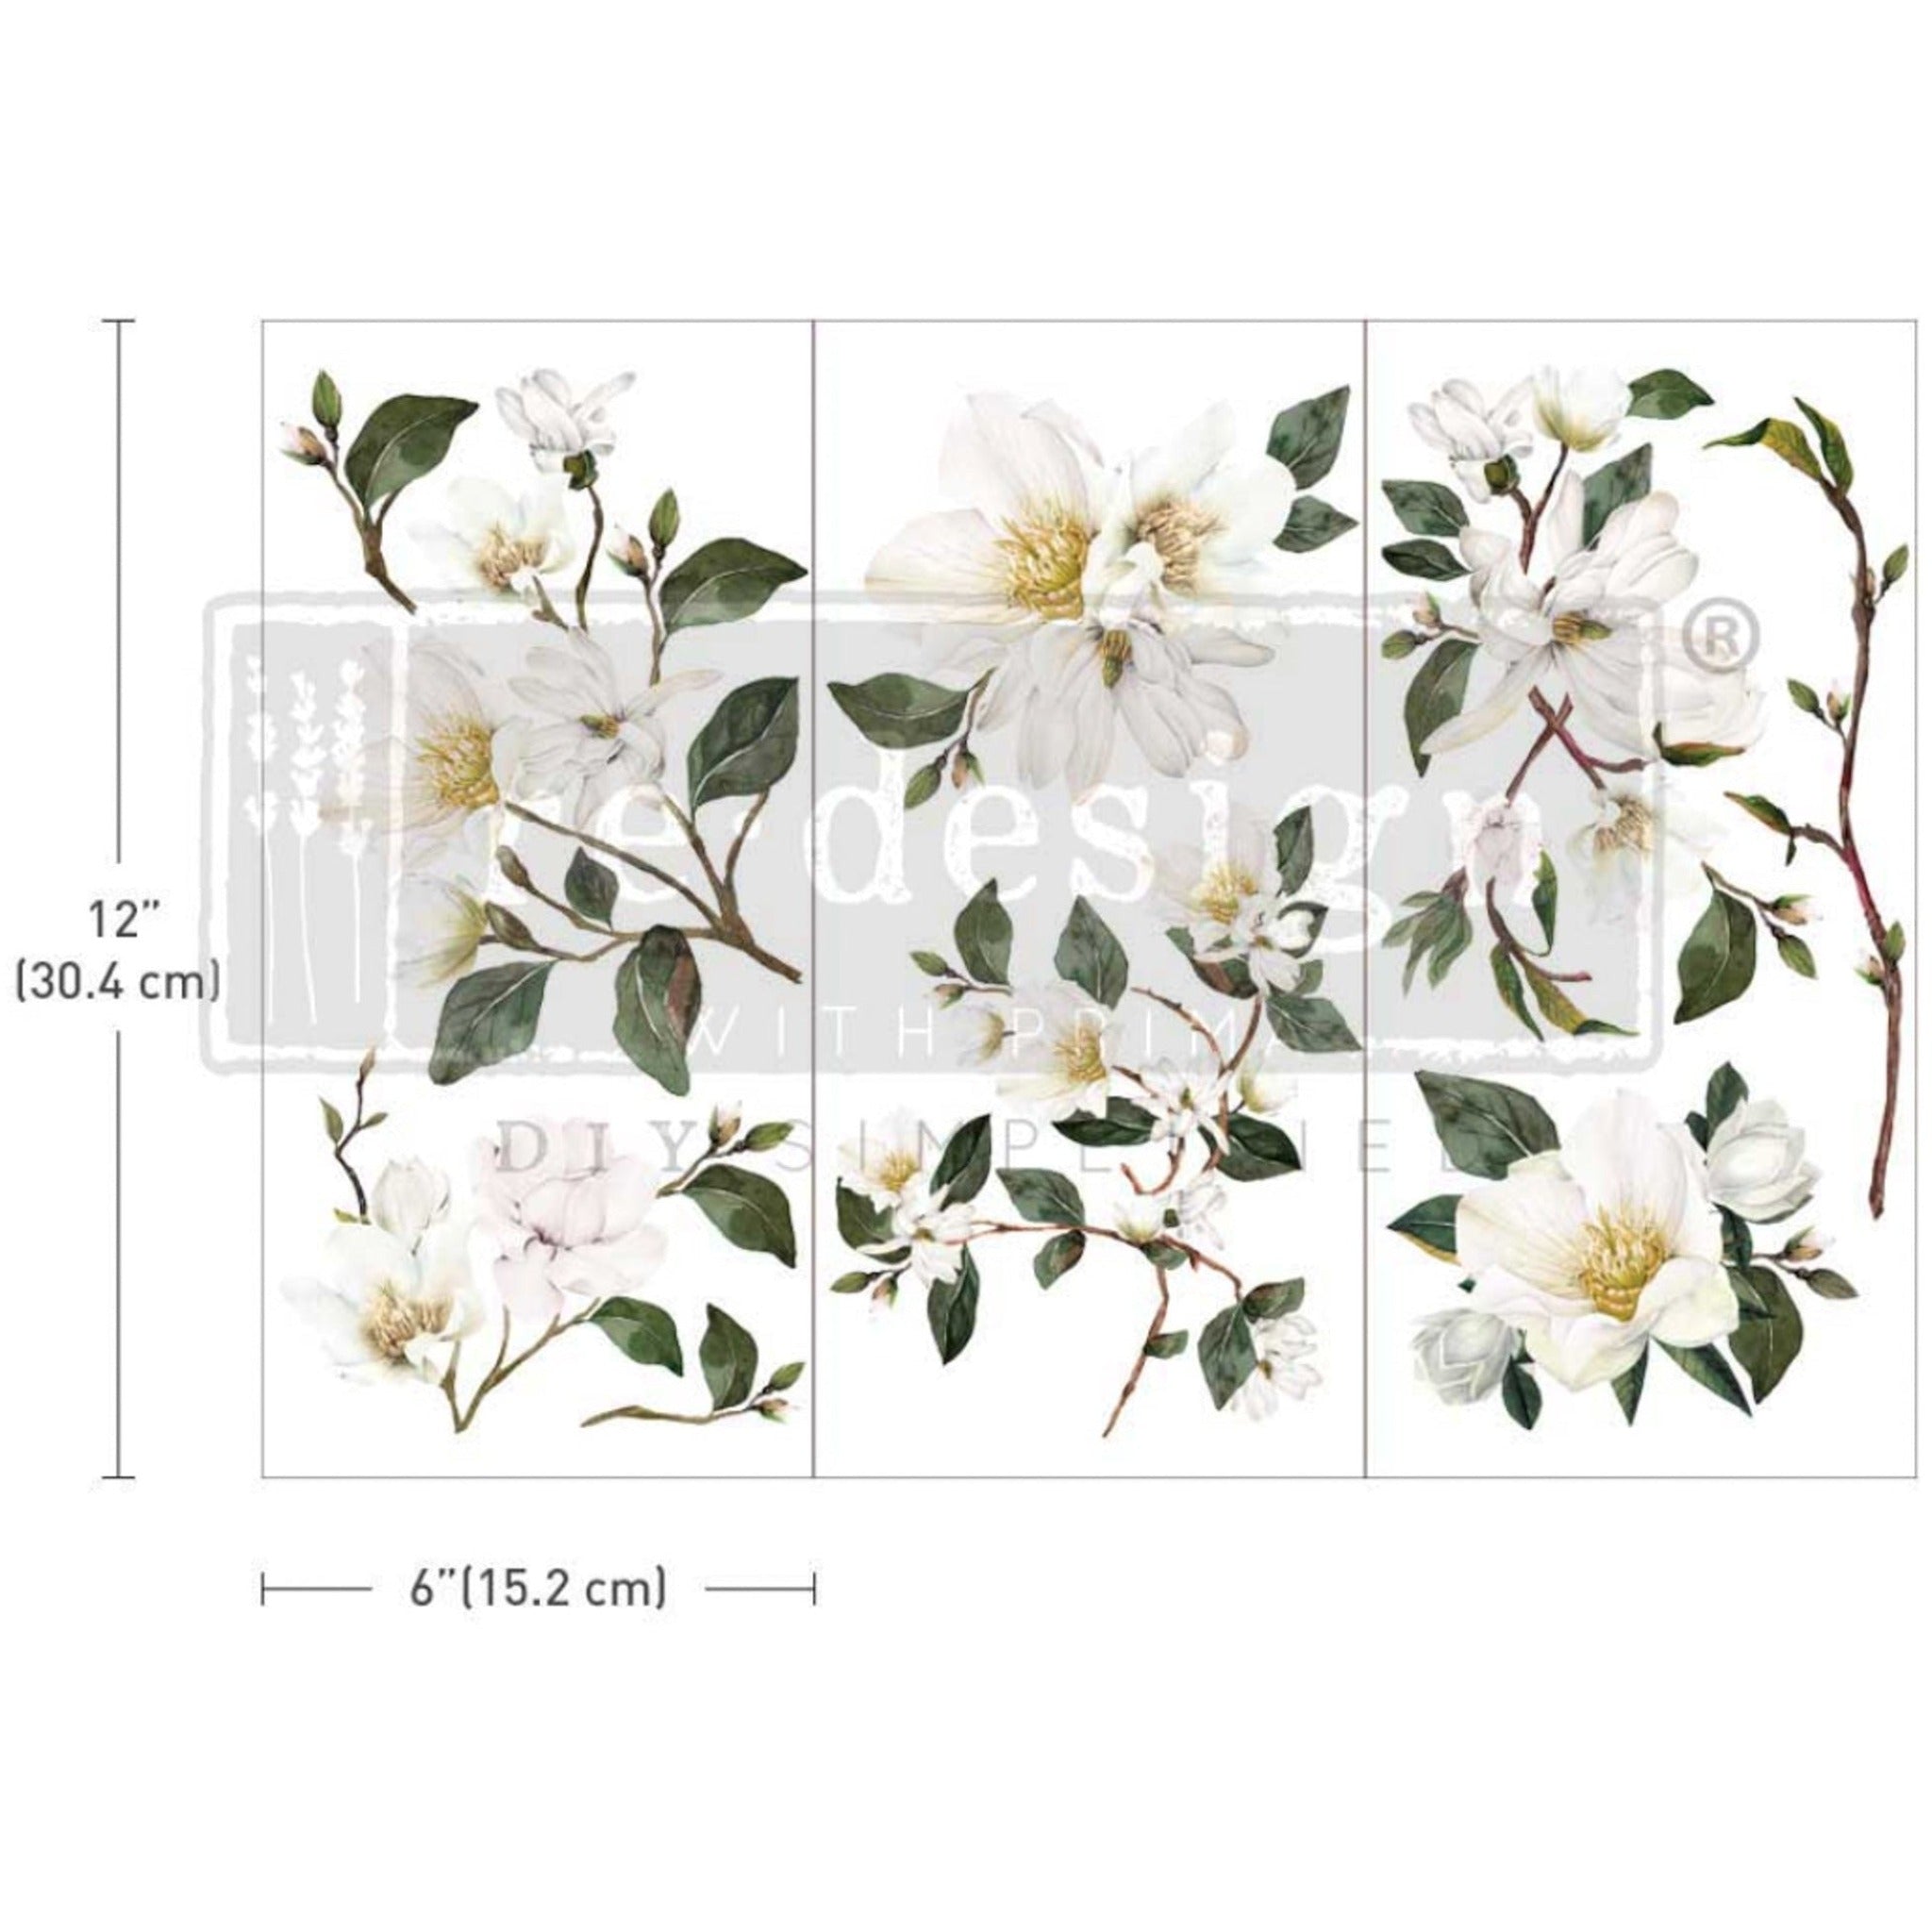 Three sheets of ReDesign with Prima's White Magnolia small transfer are against a white background. Measurements for 1 sheet reads: 12" [30.4 cm] by 6" [15.2 cm].